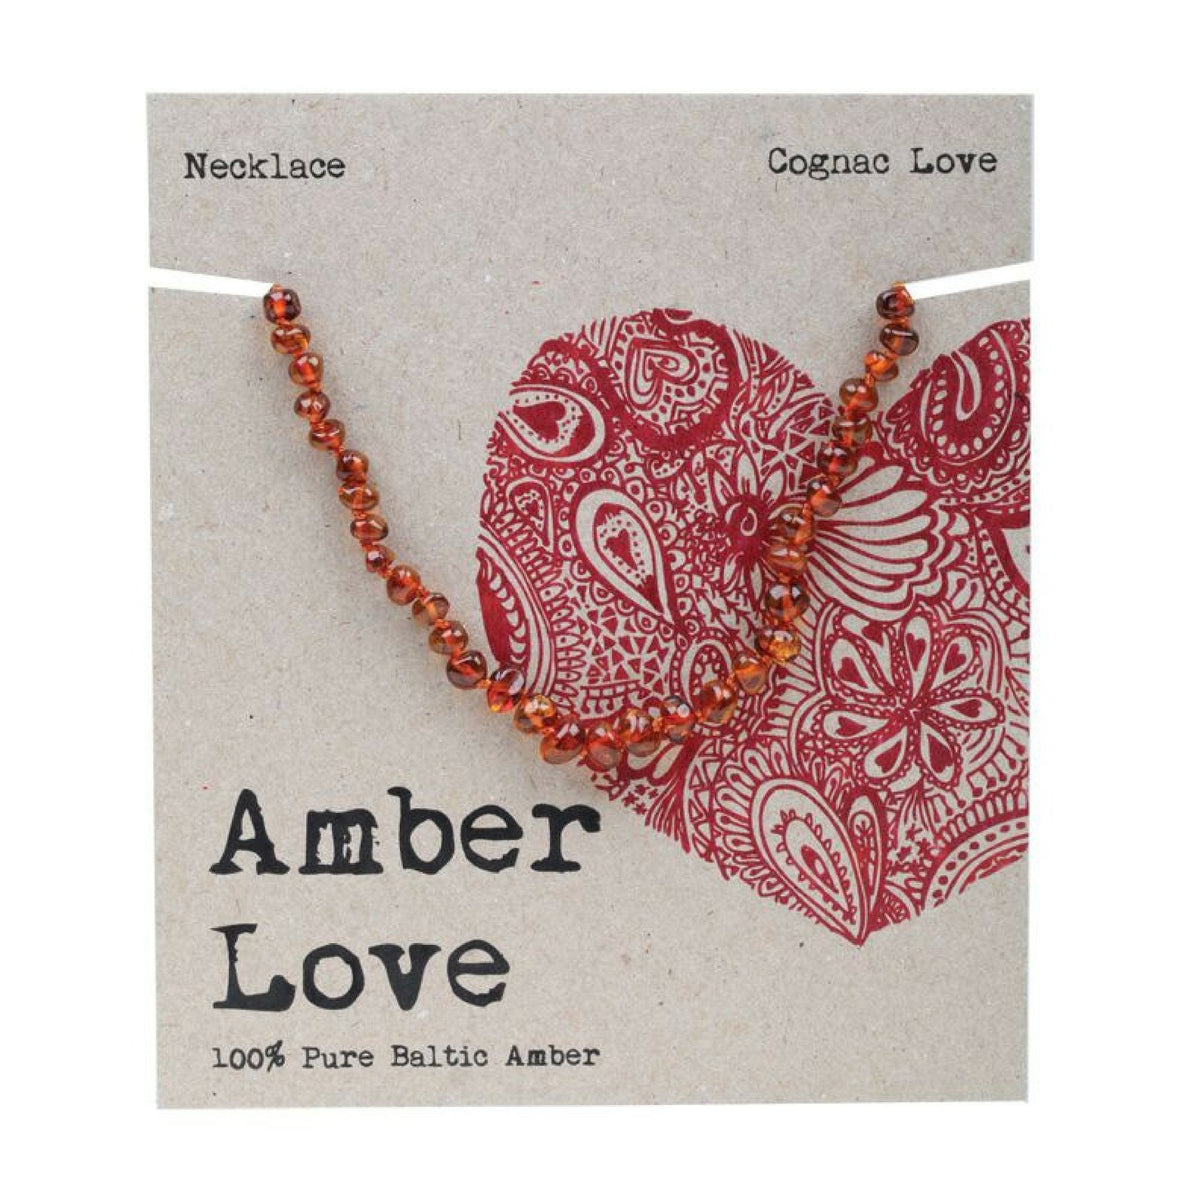 Amber Love Pure Baltic Amber - Necklace - The Nappy Shop